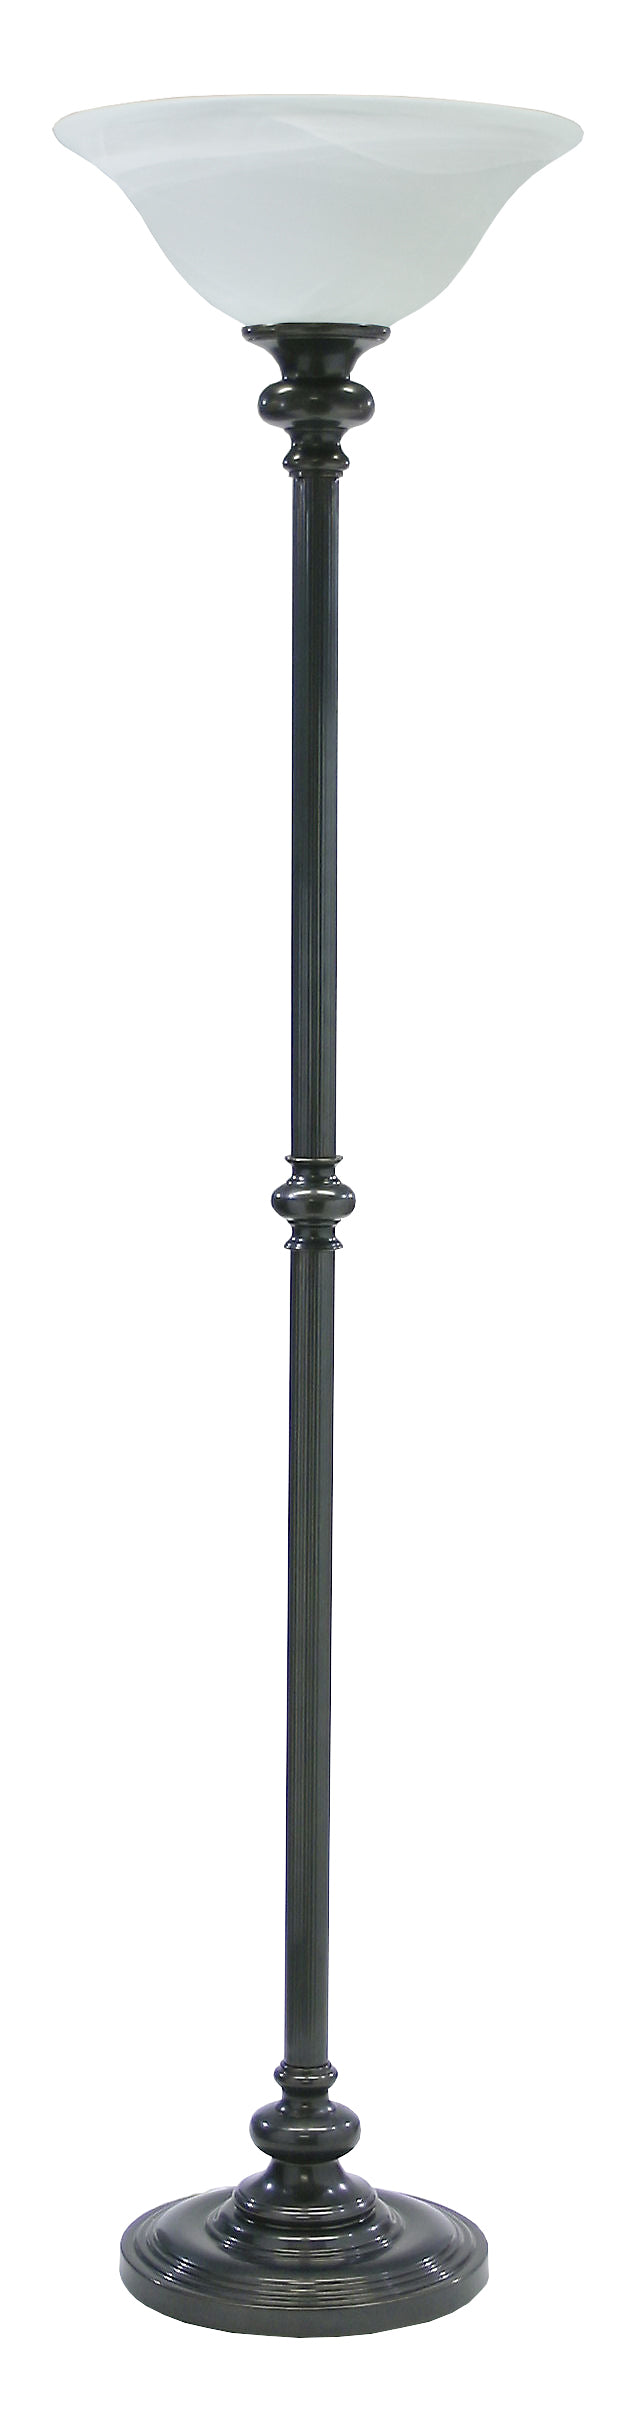 House of Troy Newport 68.75" Floor Lamp Oil Rubbed Bronze N600-OB-O